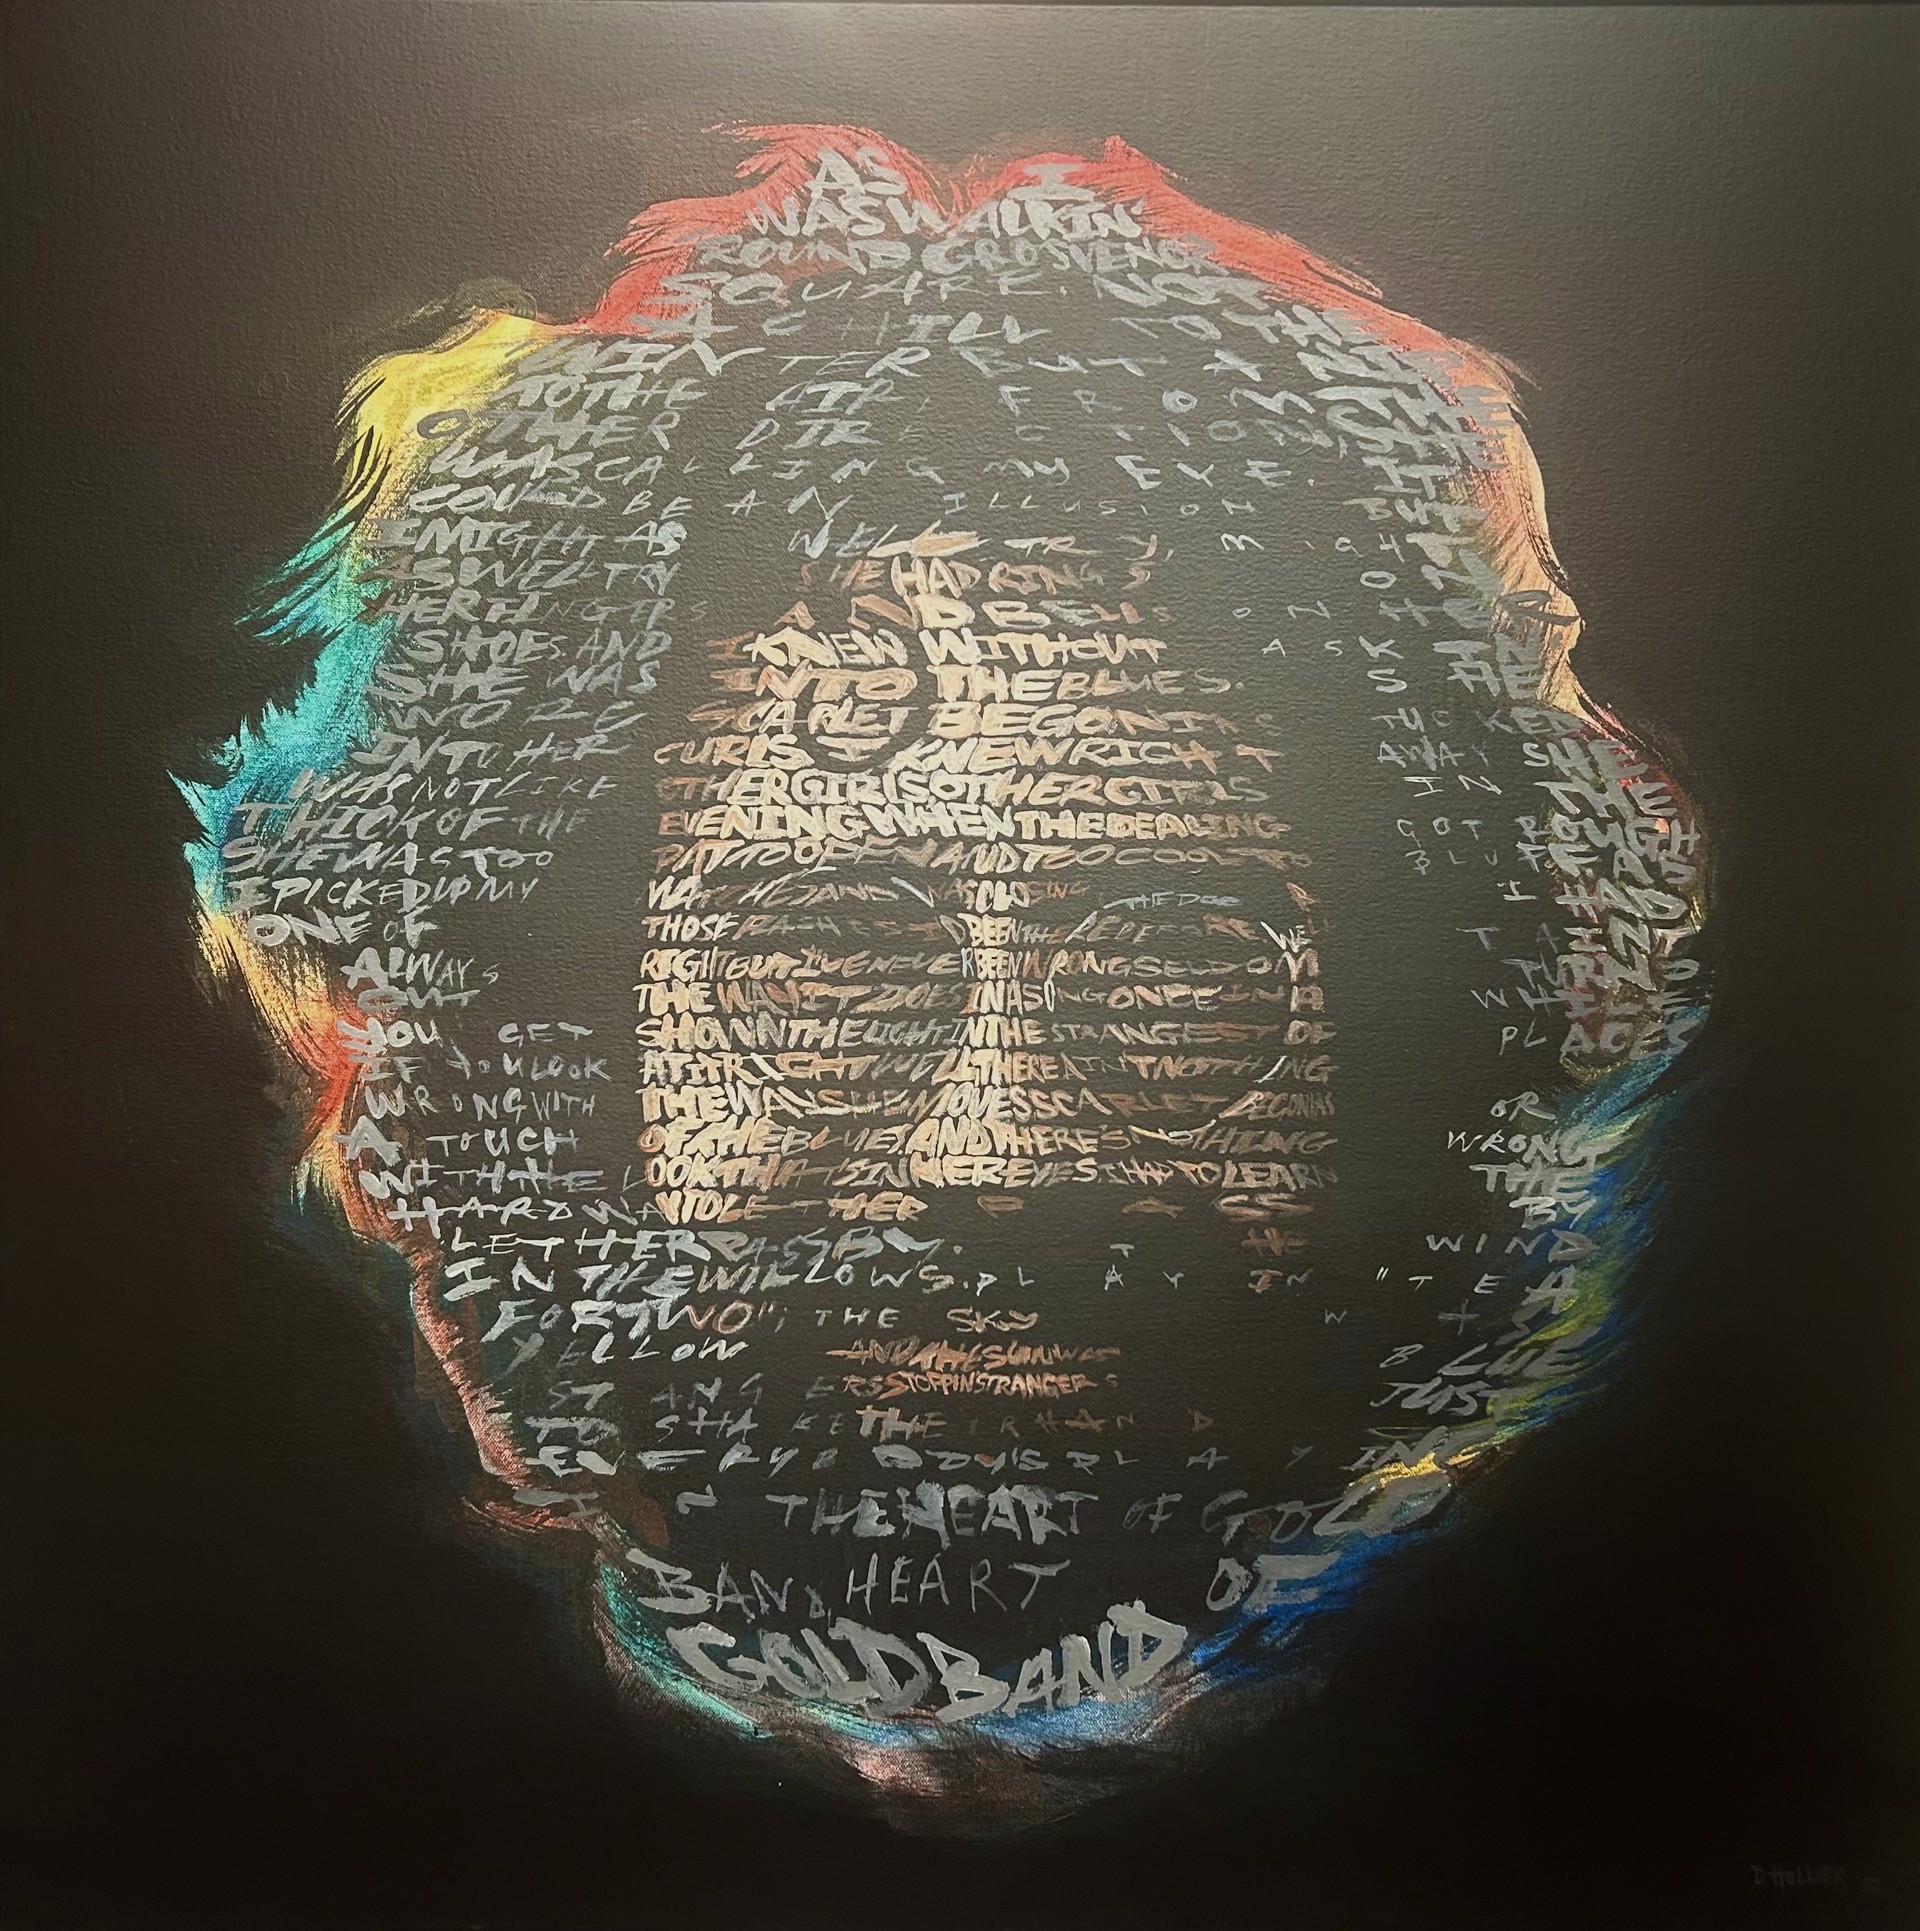 Jerry Garcia ('Scarlet Begonias' By The Grateful Dead) by David Hollier